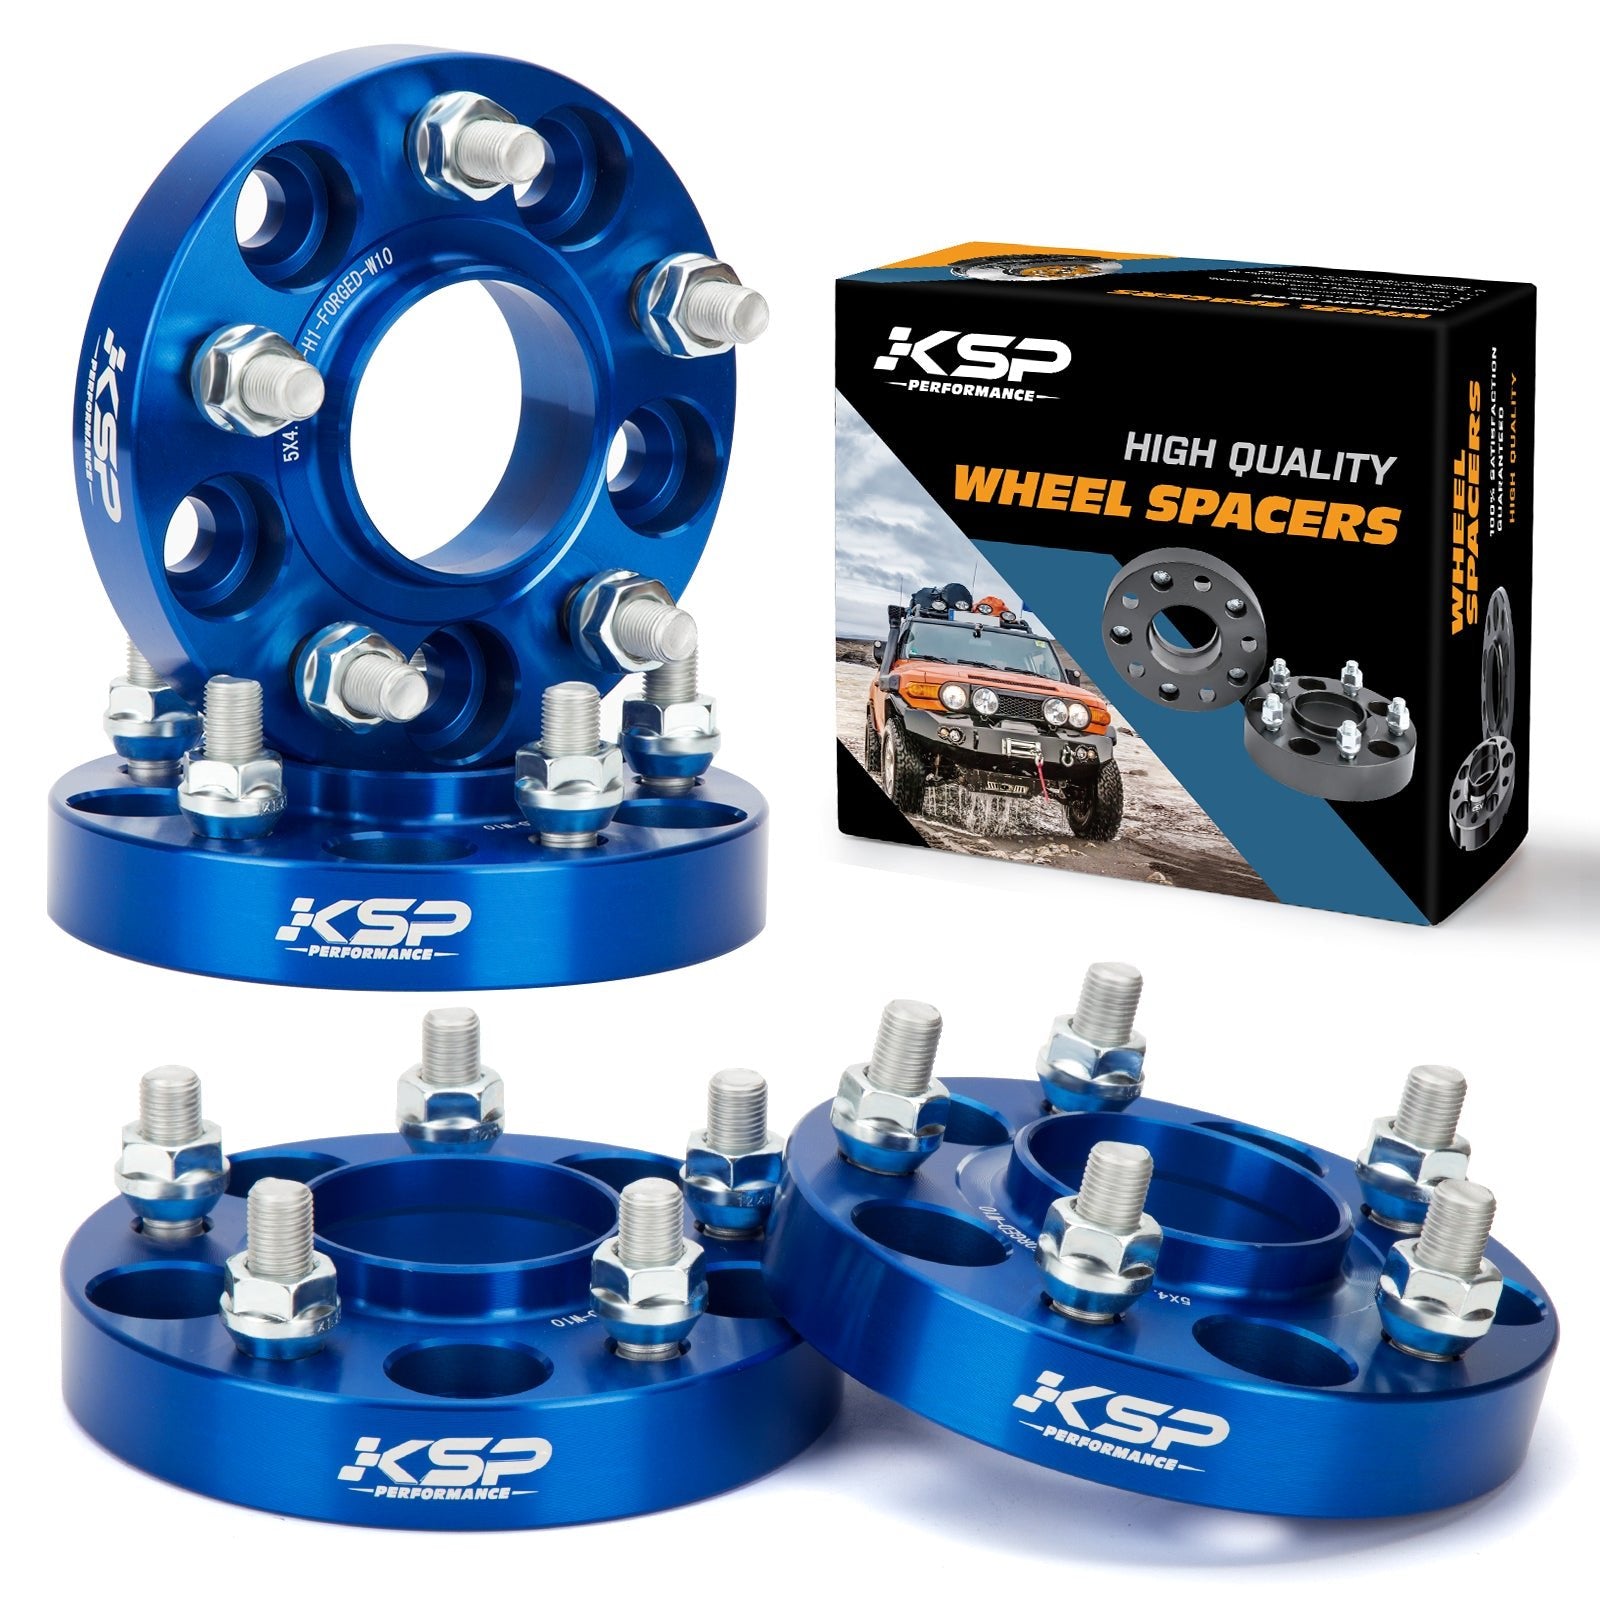 Hubcentric Wheel Spacers 25mm 5x4.5 For Nissan 350Z 370Z Altima Sentra xccscss.